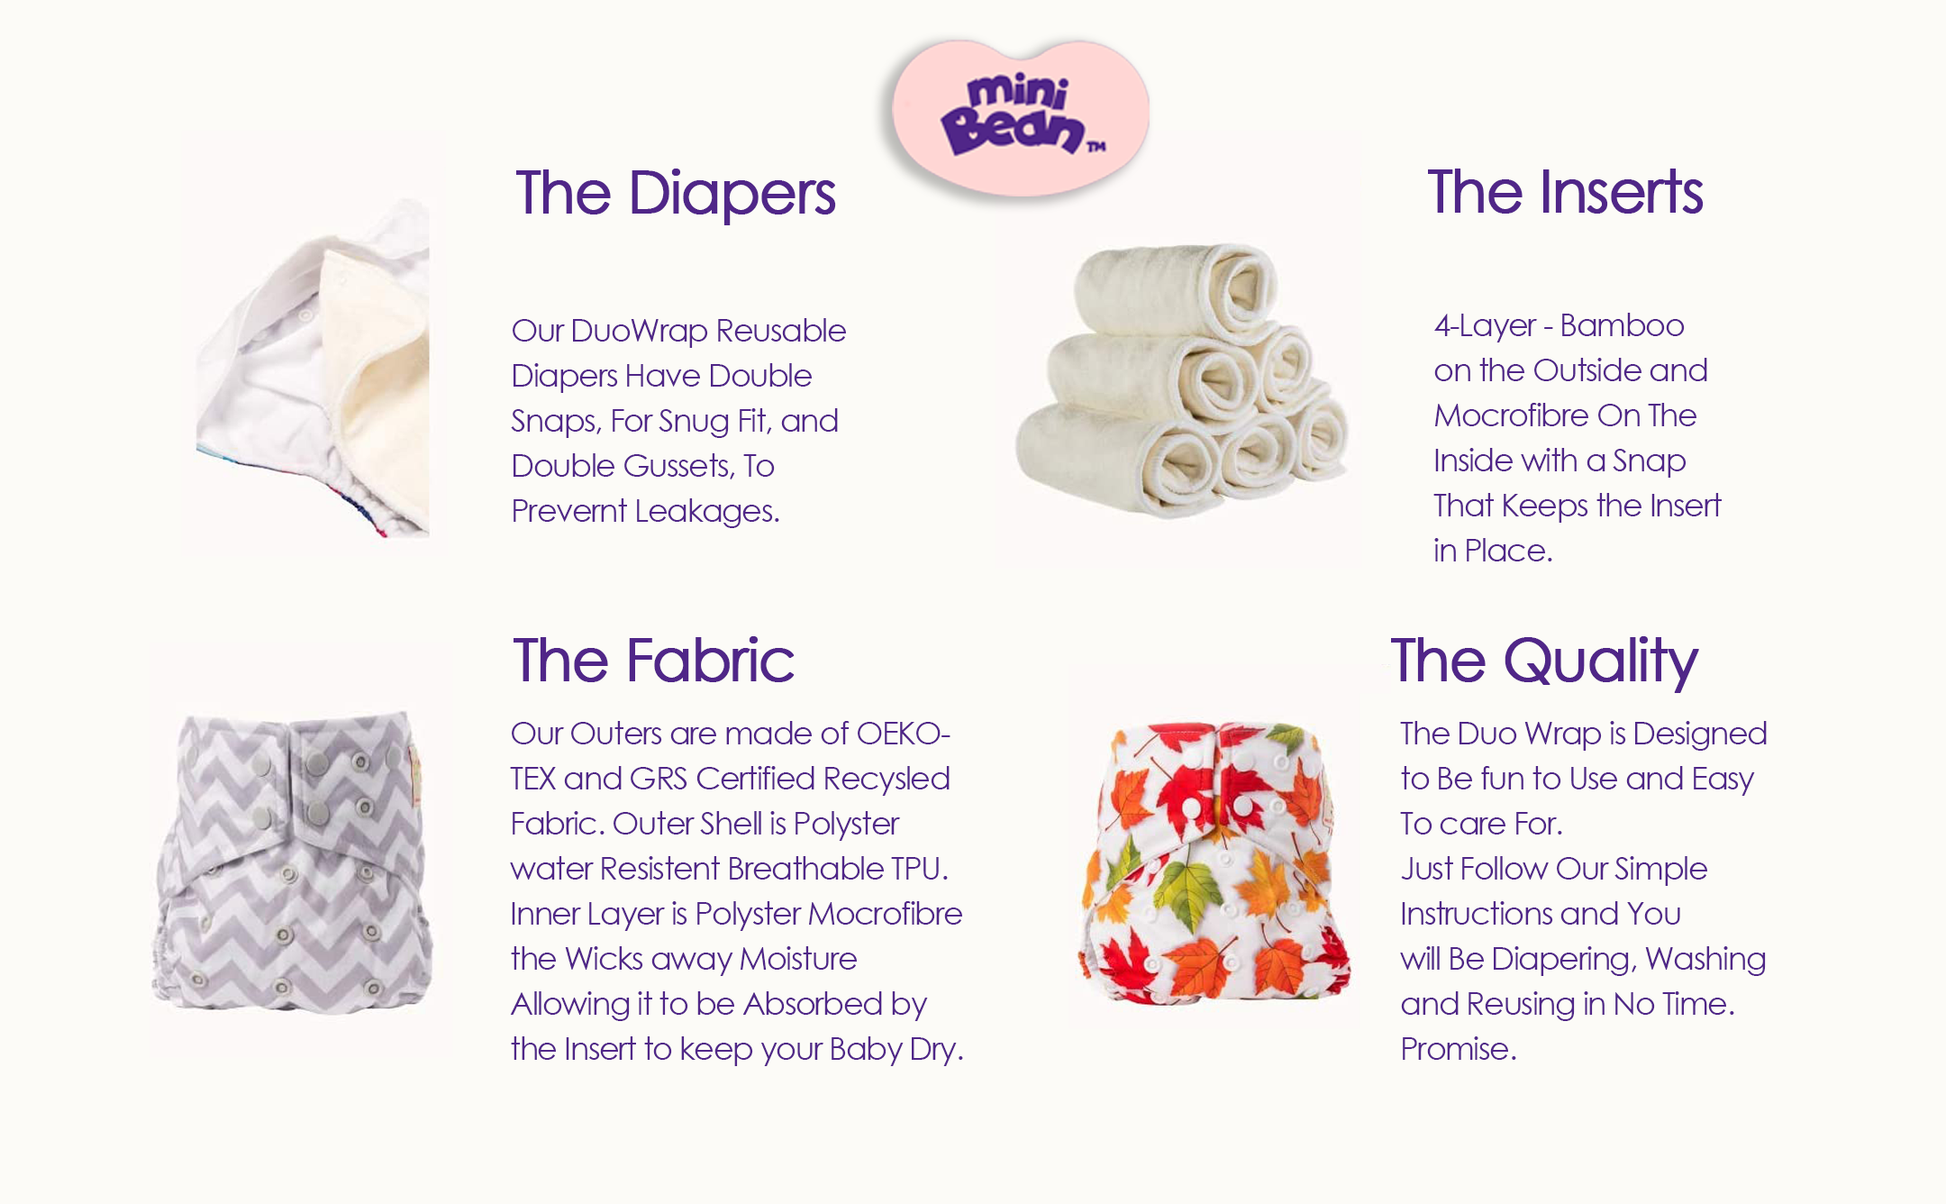 Using Cloth Diapers? Here's How to Wash Them